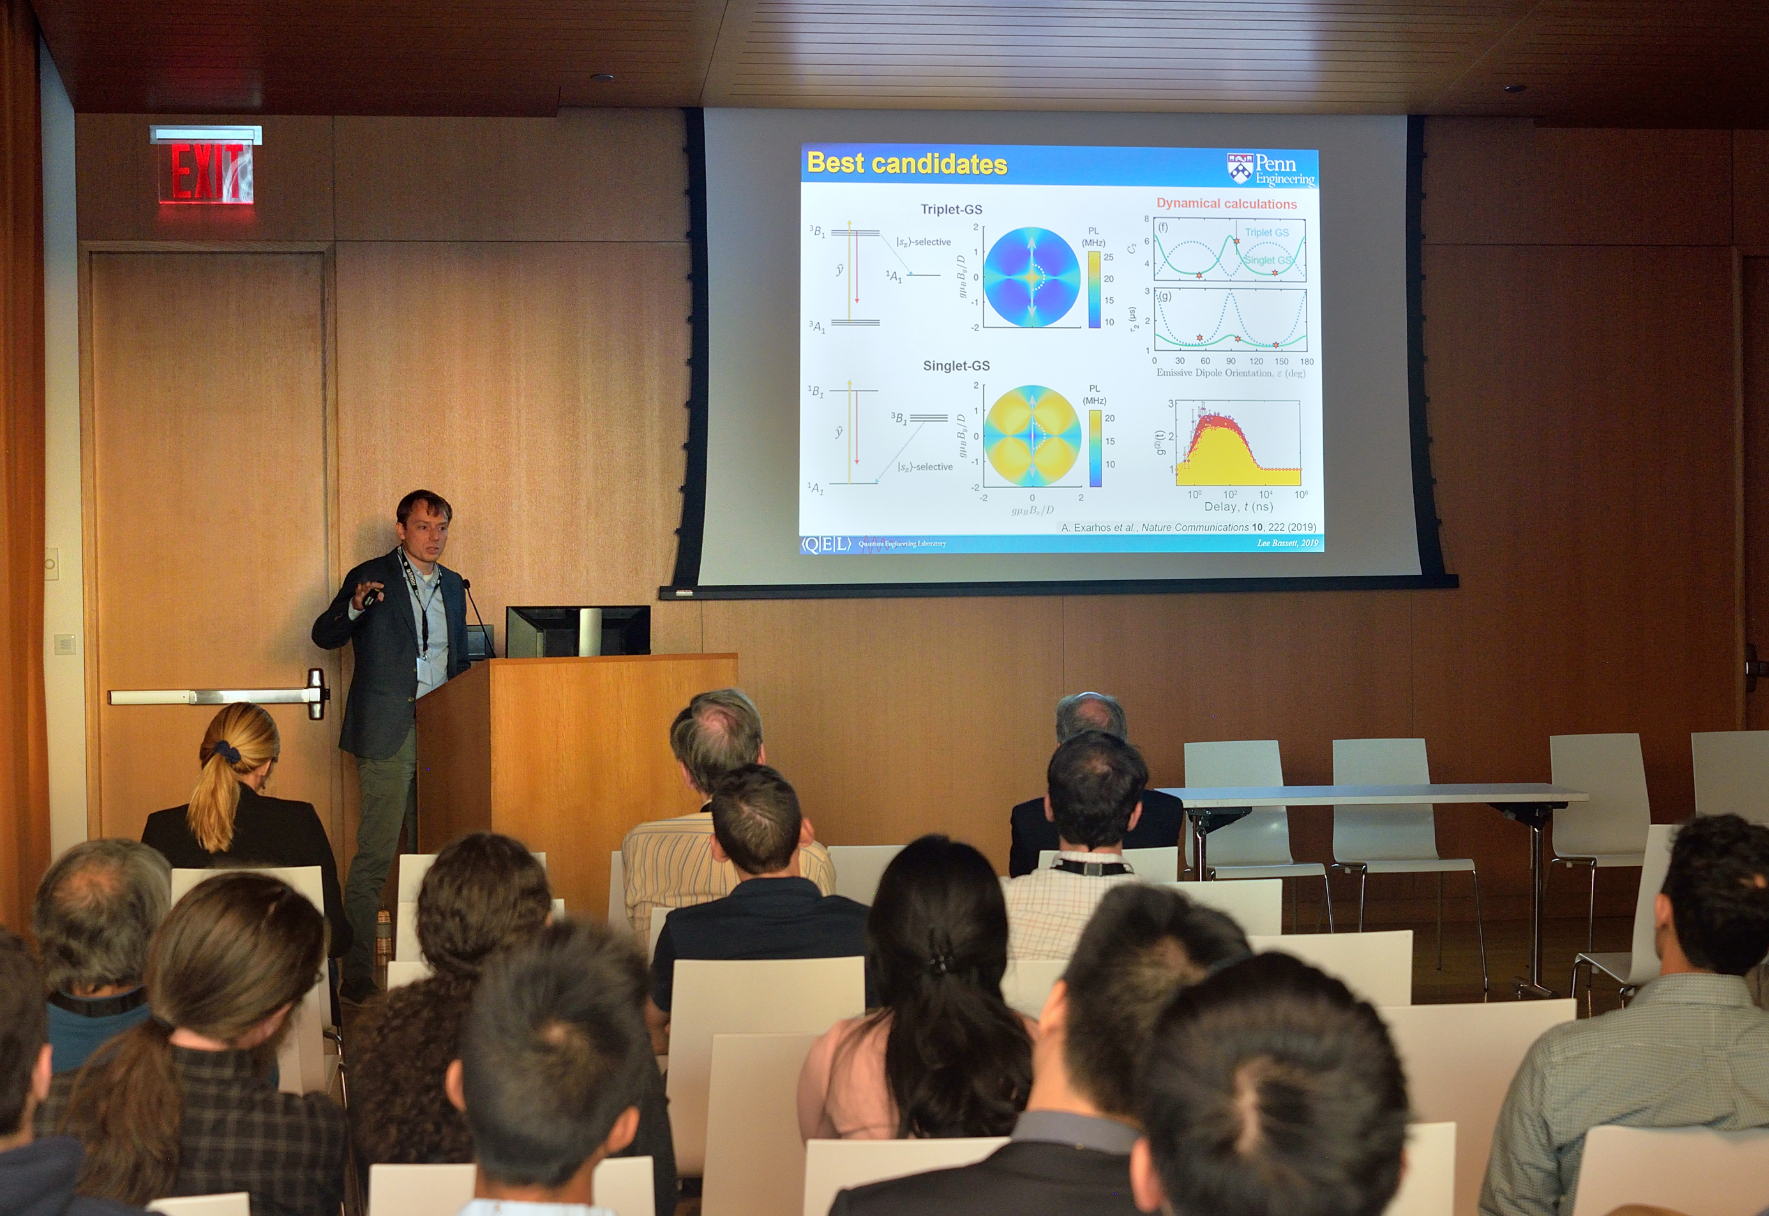 a person giving a scientific presentation in front of a room of people